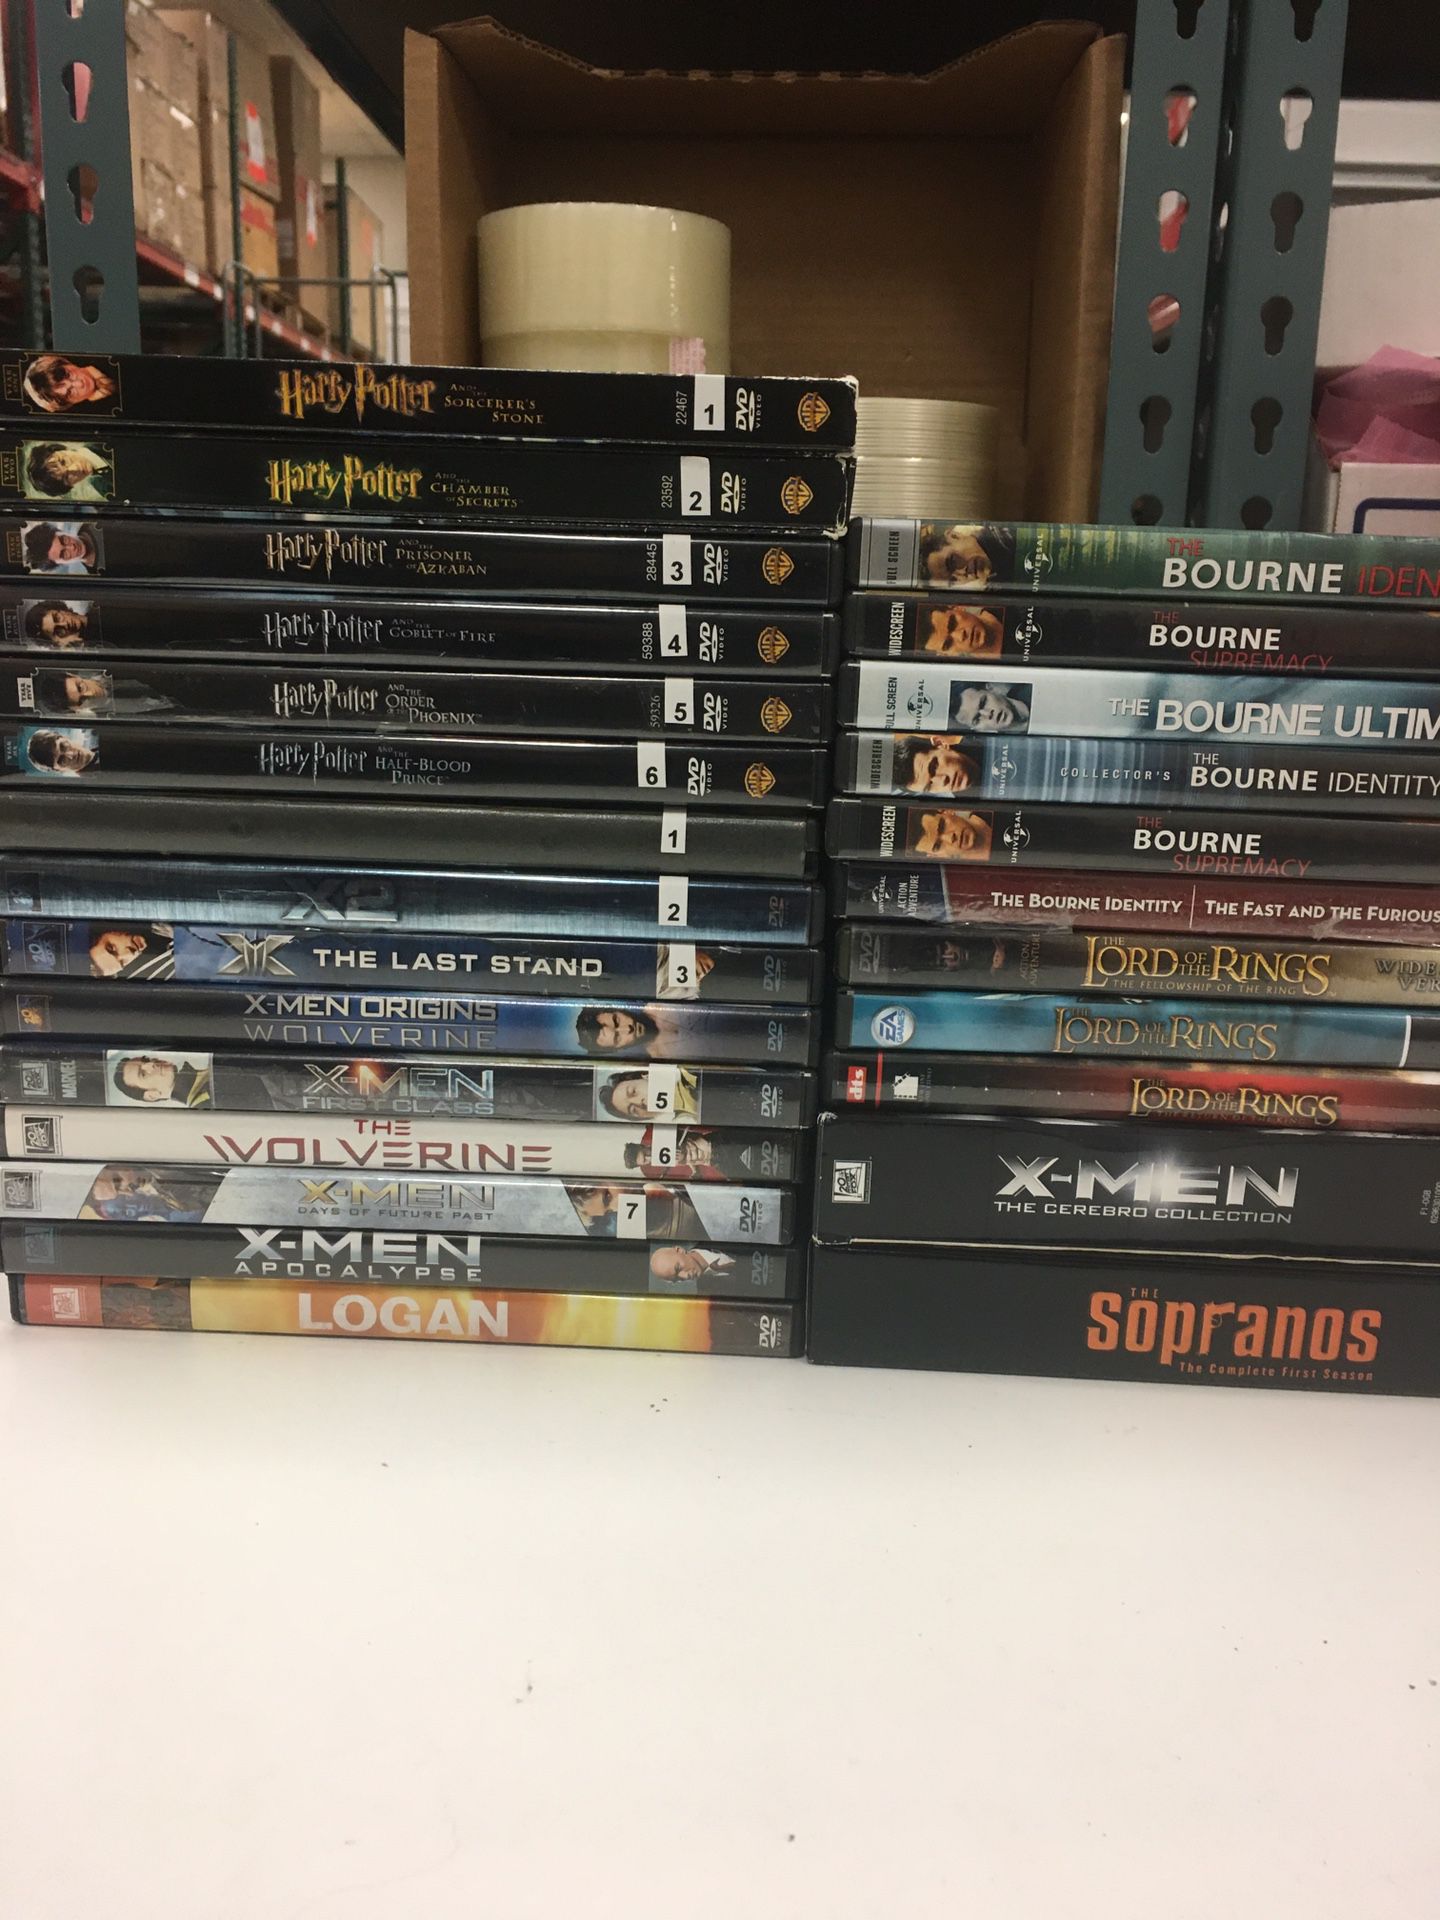 Huge collection of DVD’s